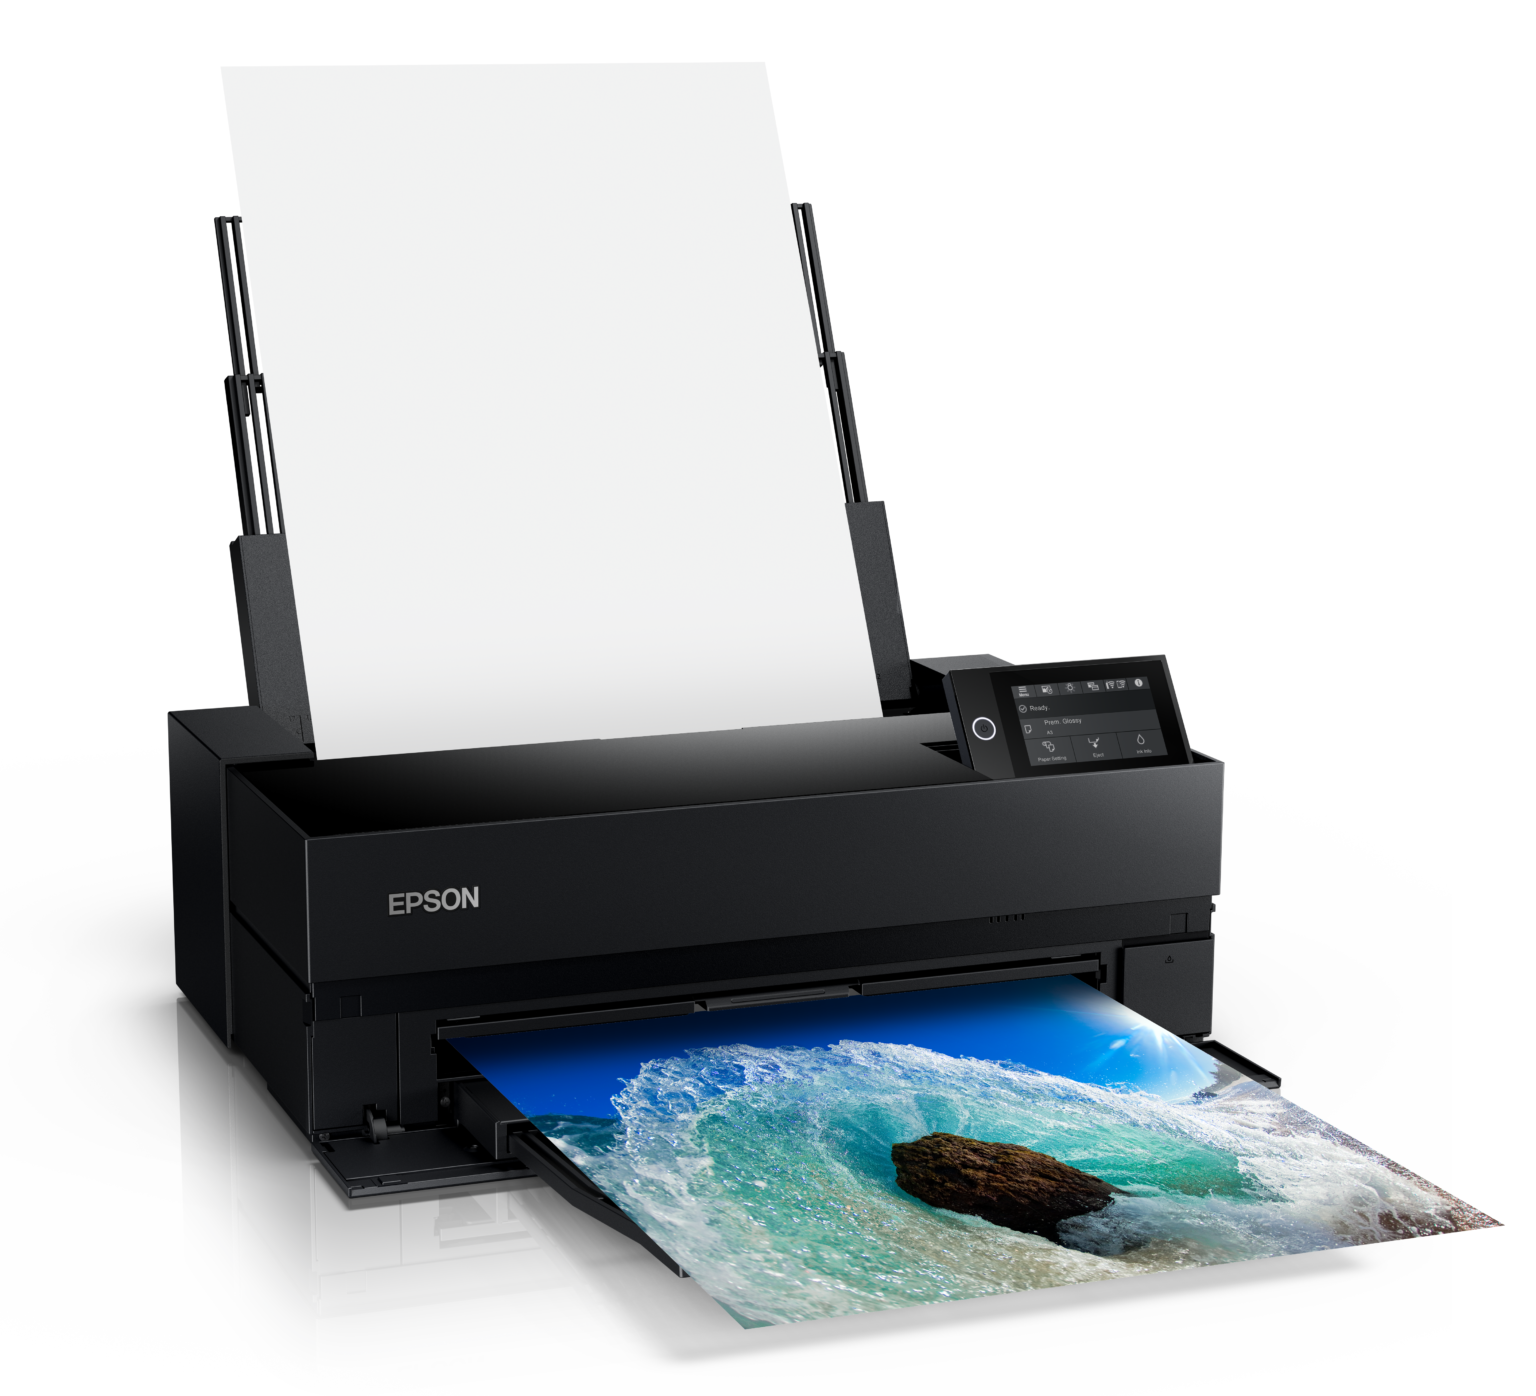 The New Epson P700 and P900 Have Photographers in Cities Mind